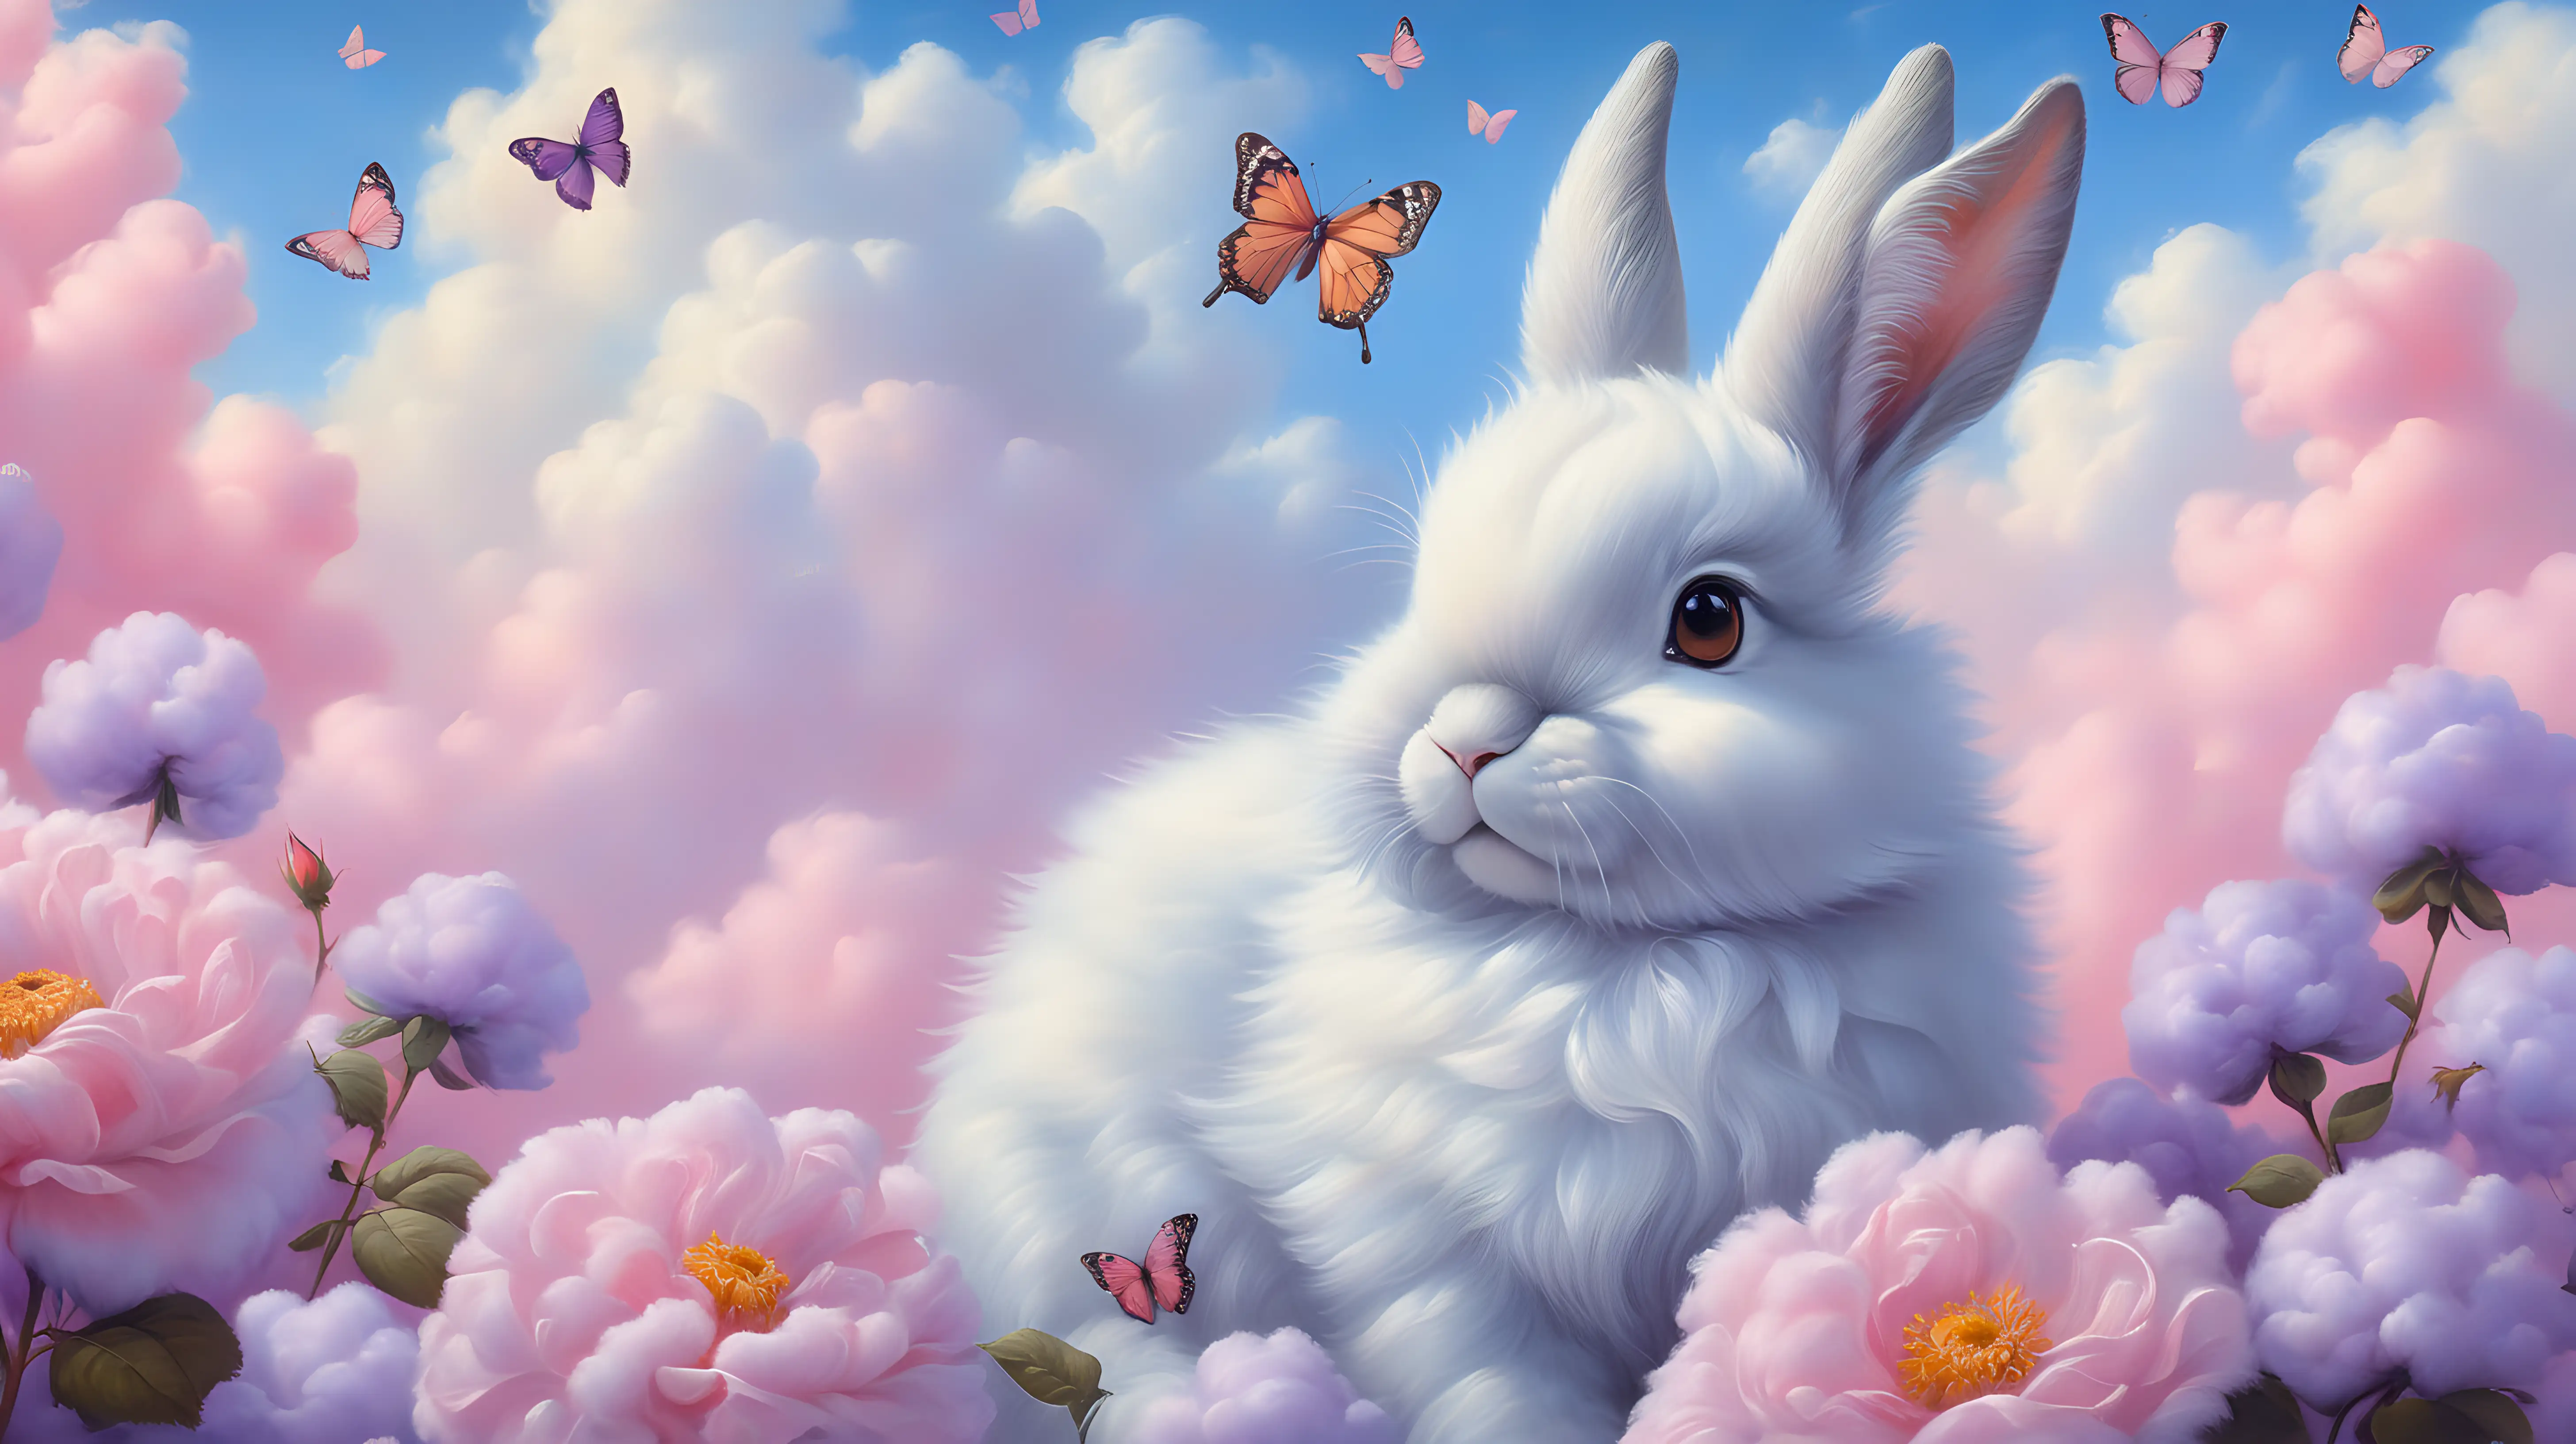 Whimsical Oil Painting of Rabbit Butterfly and Rose Cupcake in Cotton Candy Fantasy